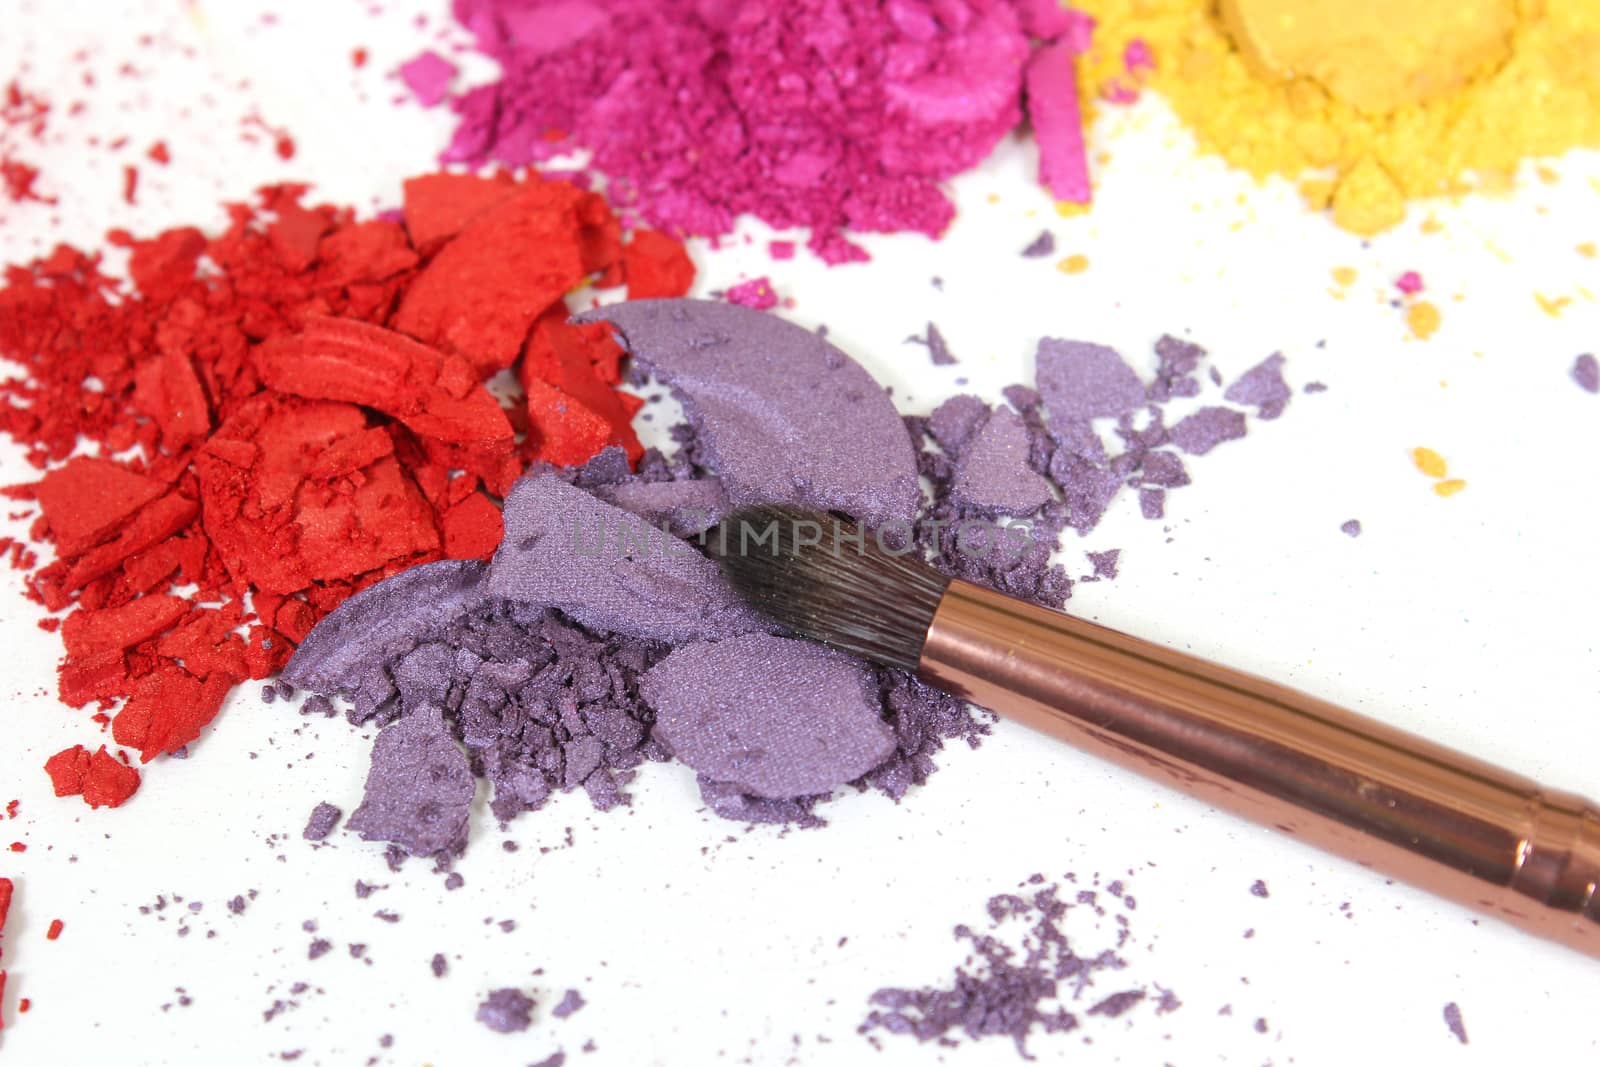 Broken Cosmetic Pigments on White Background